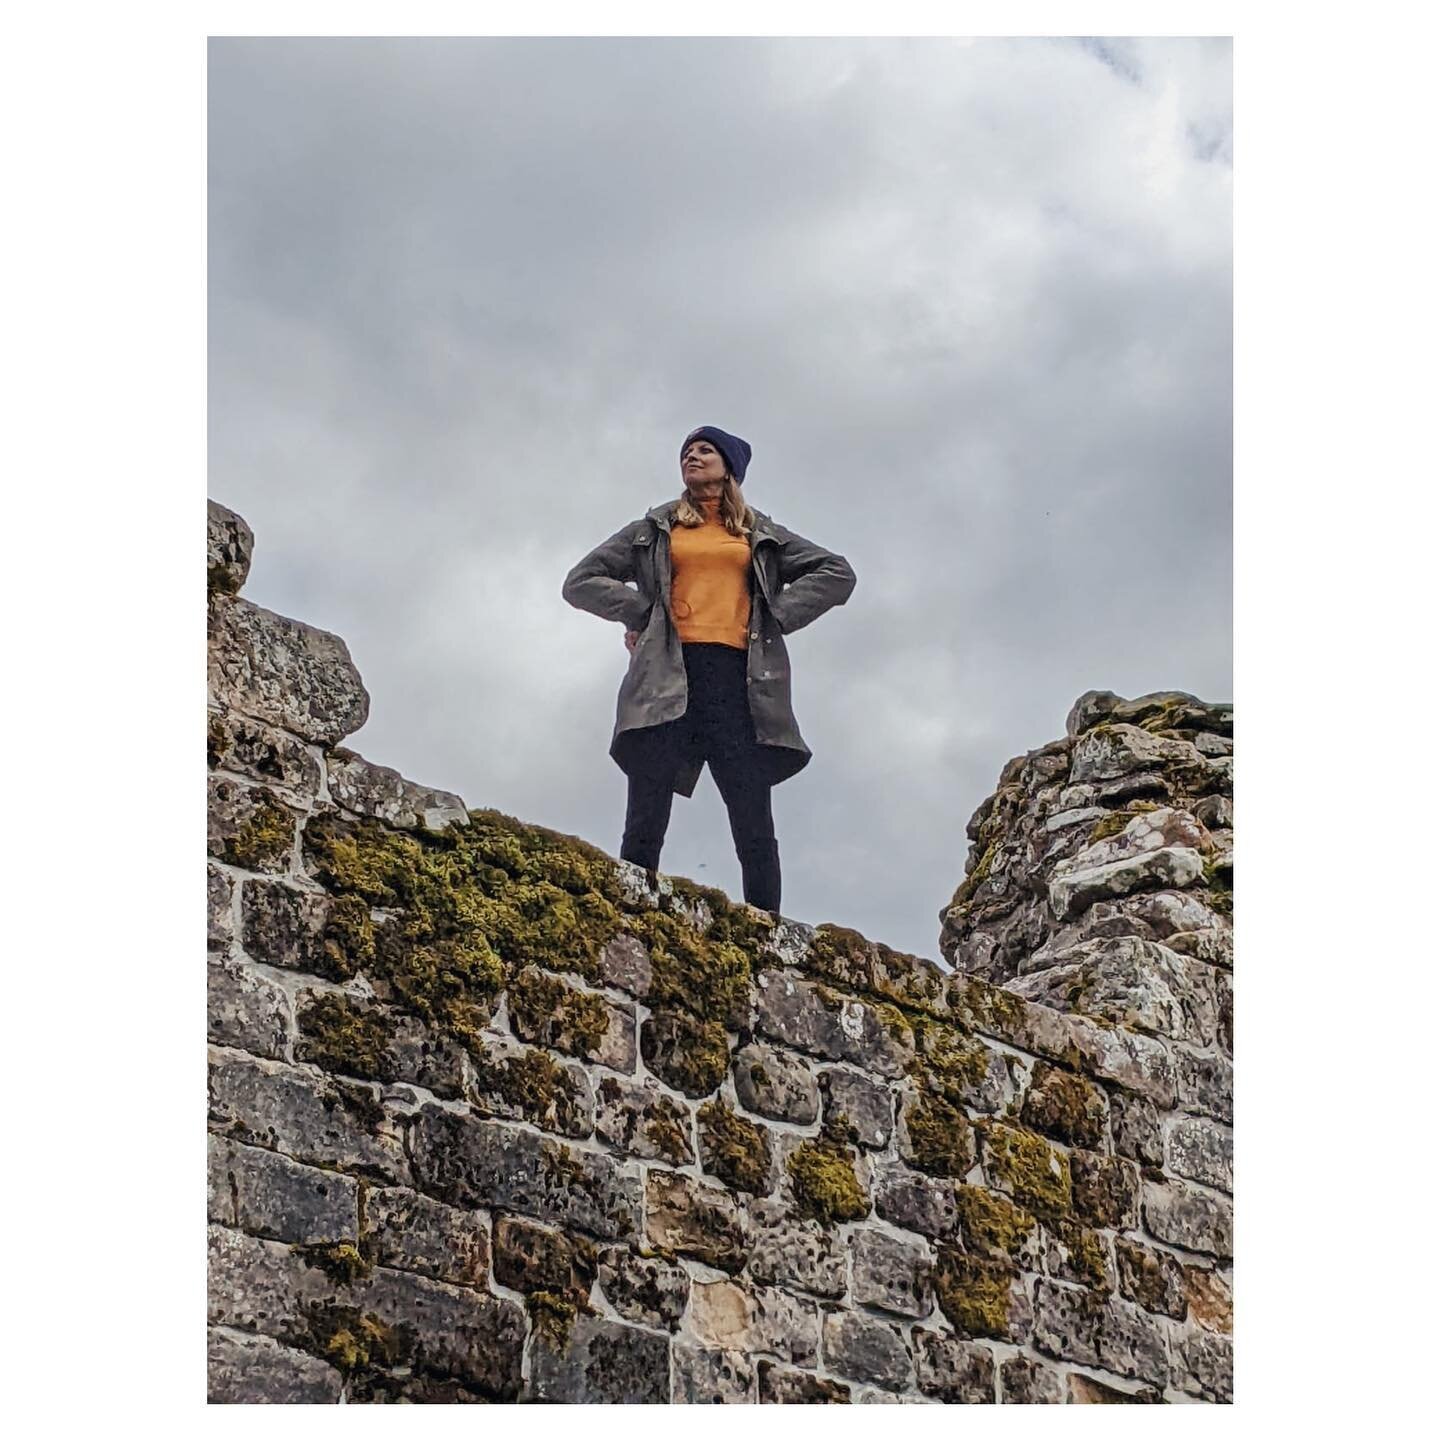 i looked at my kingdom, i was finally there (800 years later)👑 pc: @delanemorrisonwallace 
.
.
.
.
.
#castle #scotland #kildrummy #travelgram #highlands